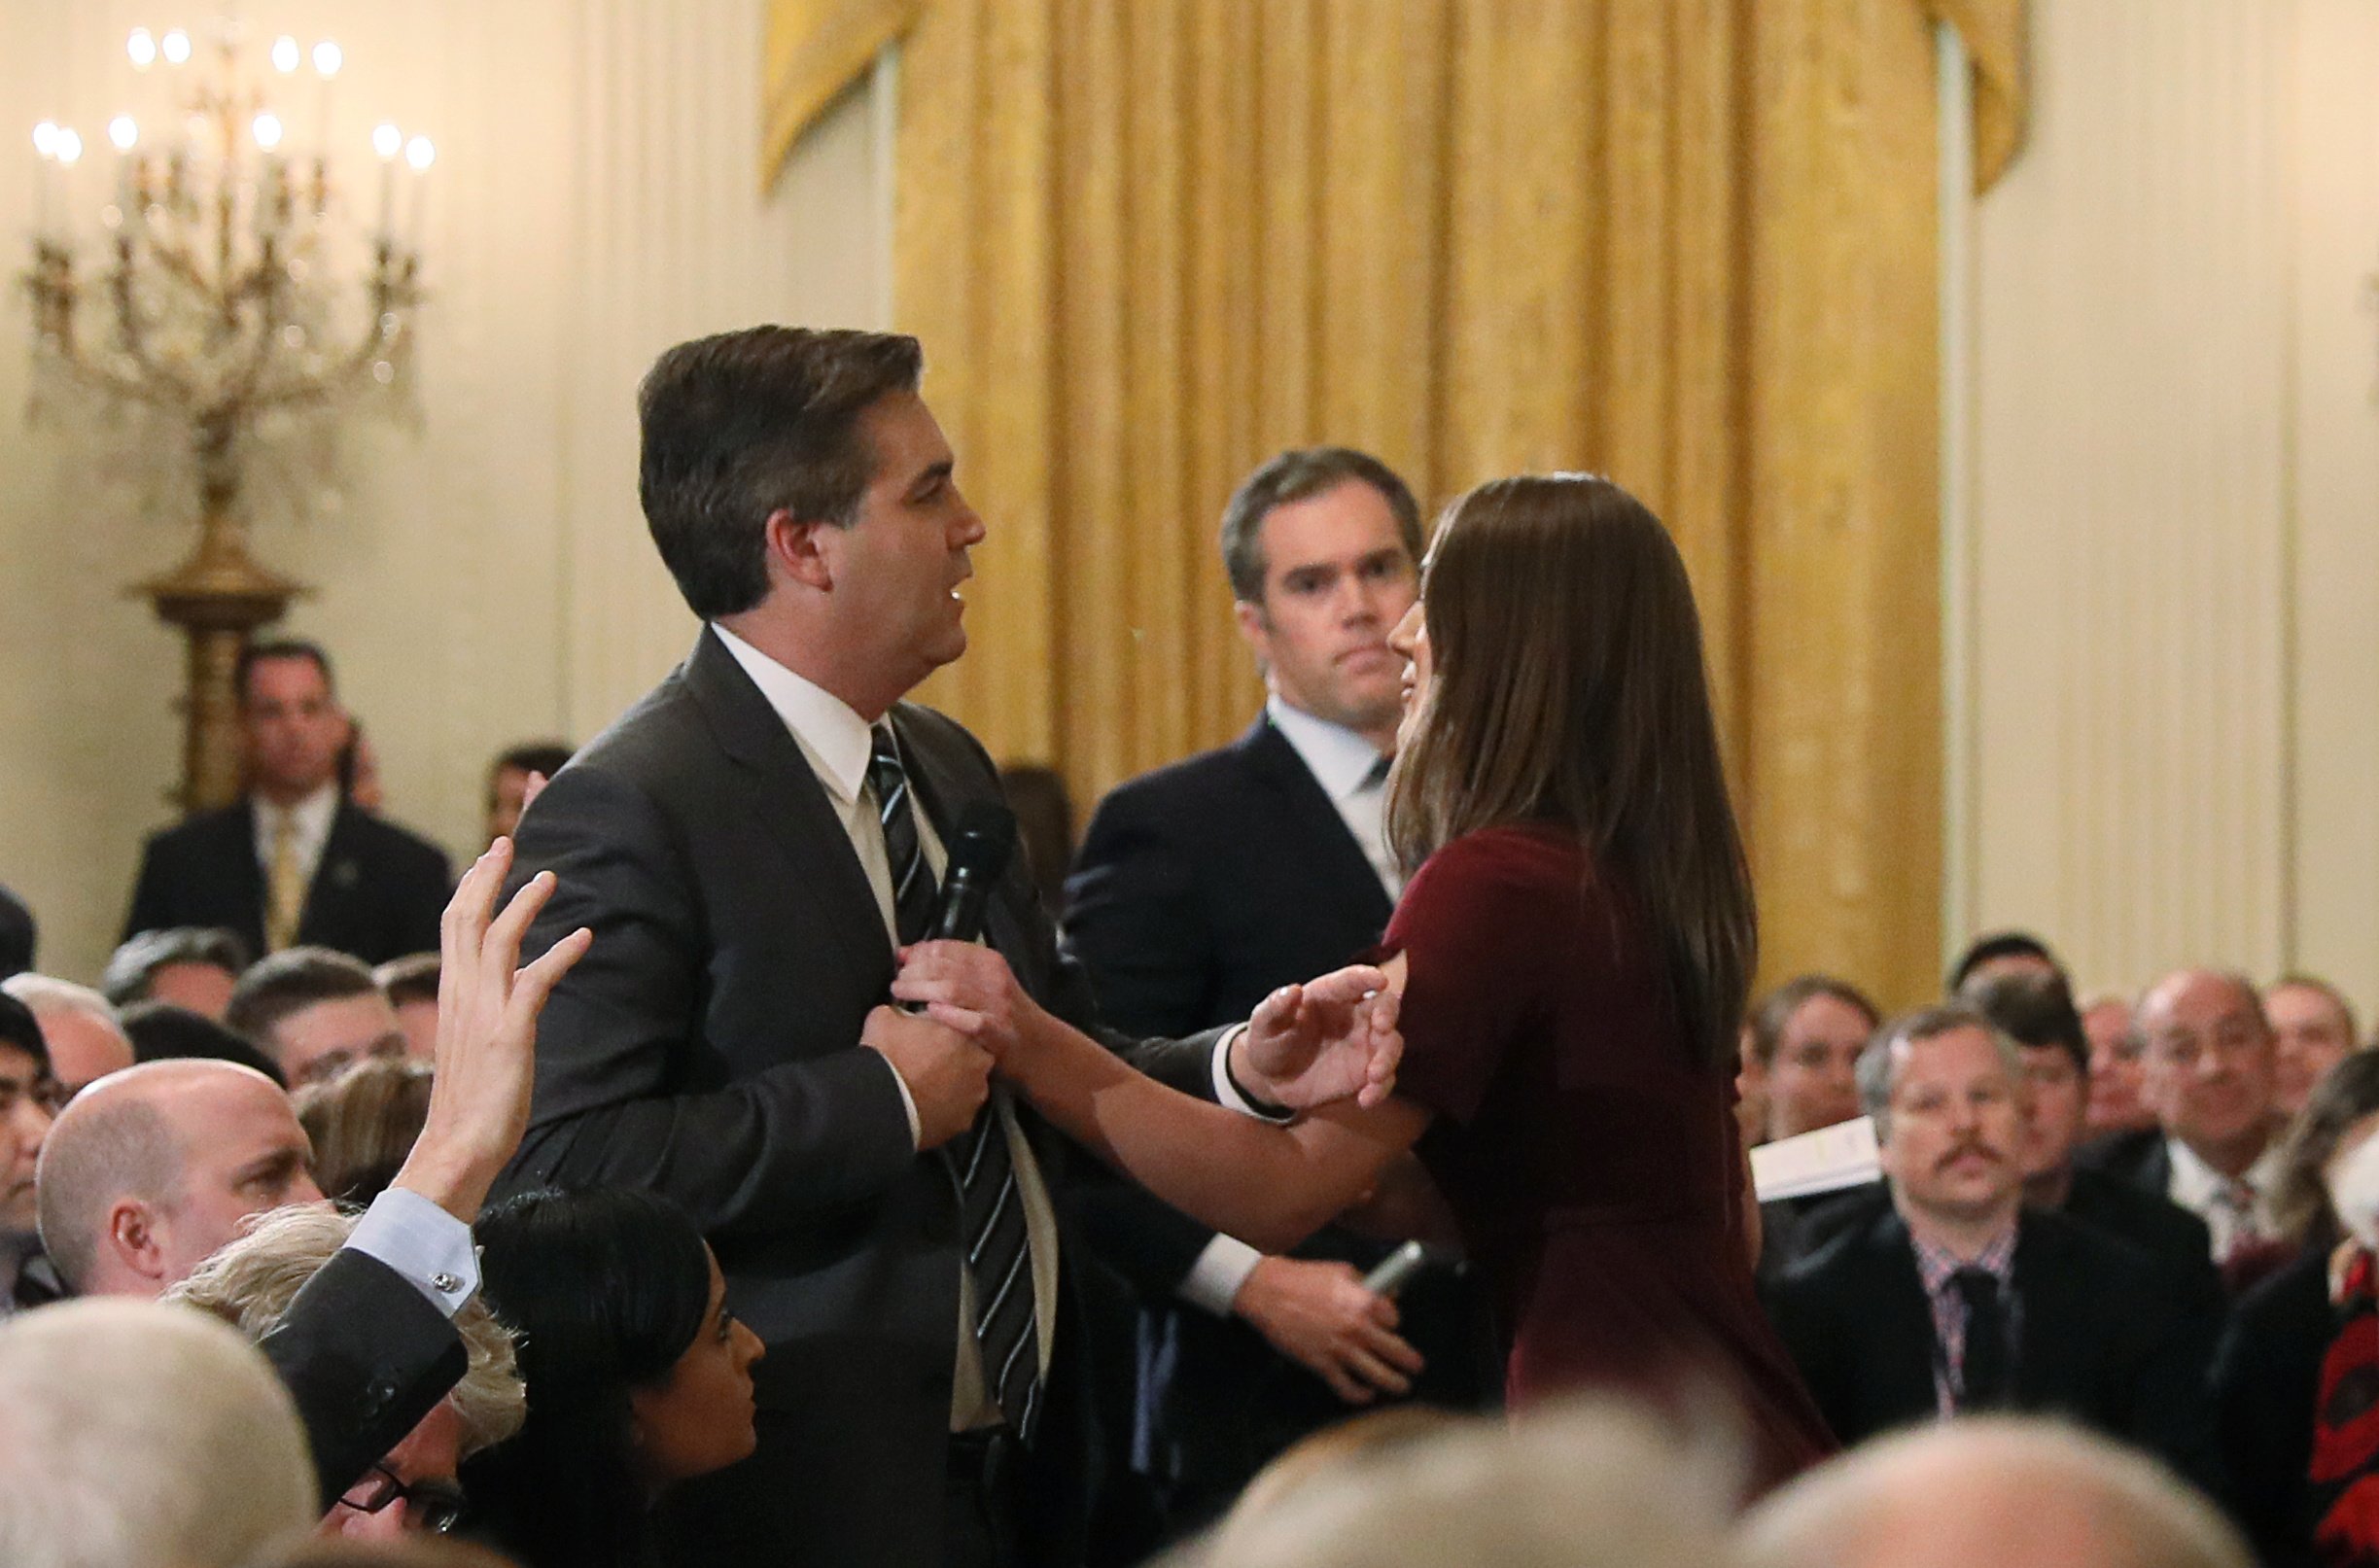 A White House intern reaches for and tries to take away the microphone held by CNN correspondent Jim Acosta as he questions U.S. President Donald Trump during a news conference at the White House in Washington, U.S., November 7, 2018. Picture taken November 7, 2018. (REUTERS/Jonathan Ernst)